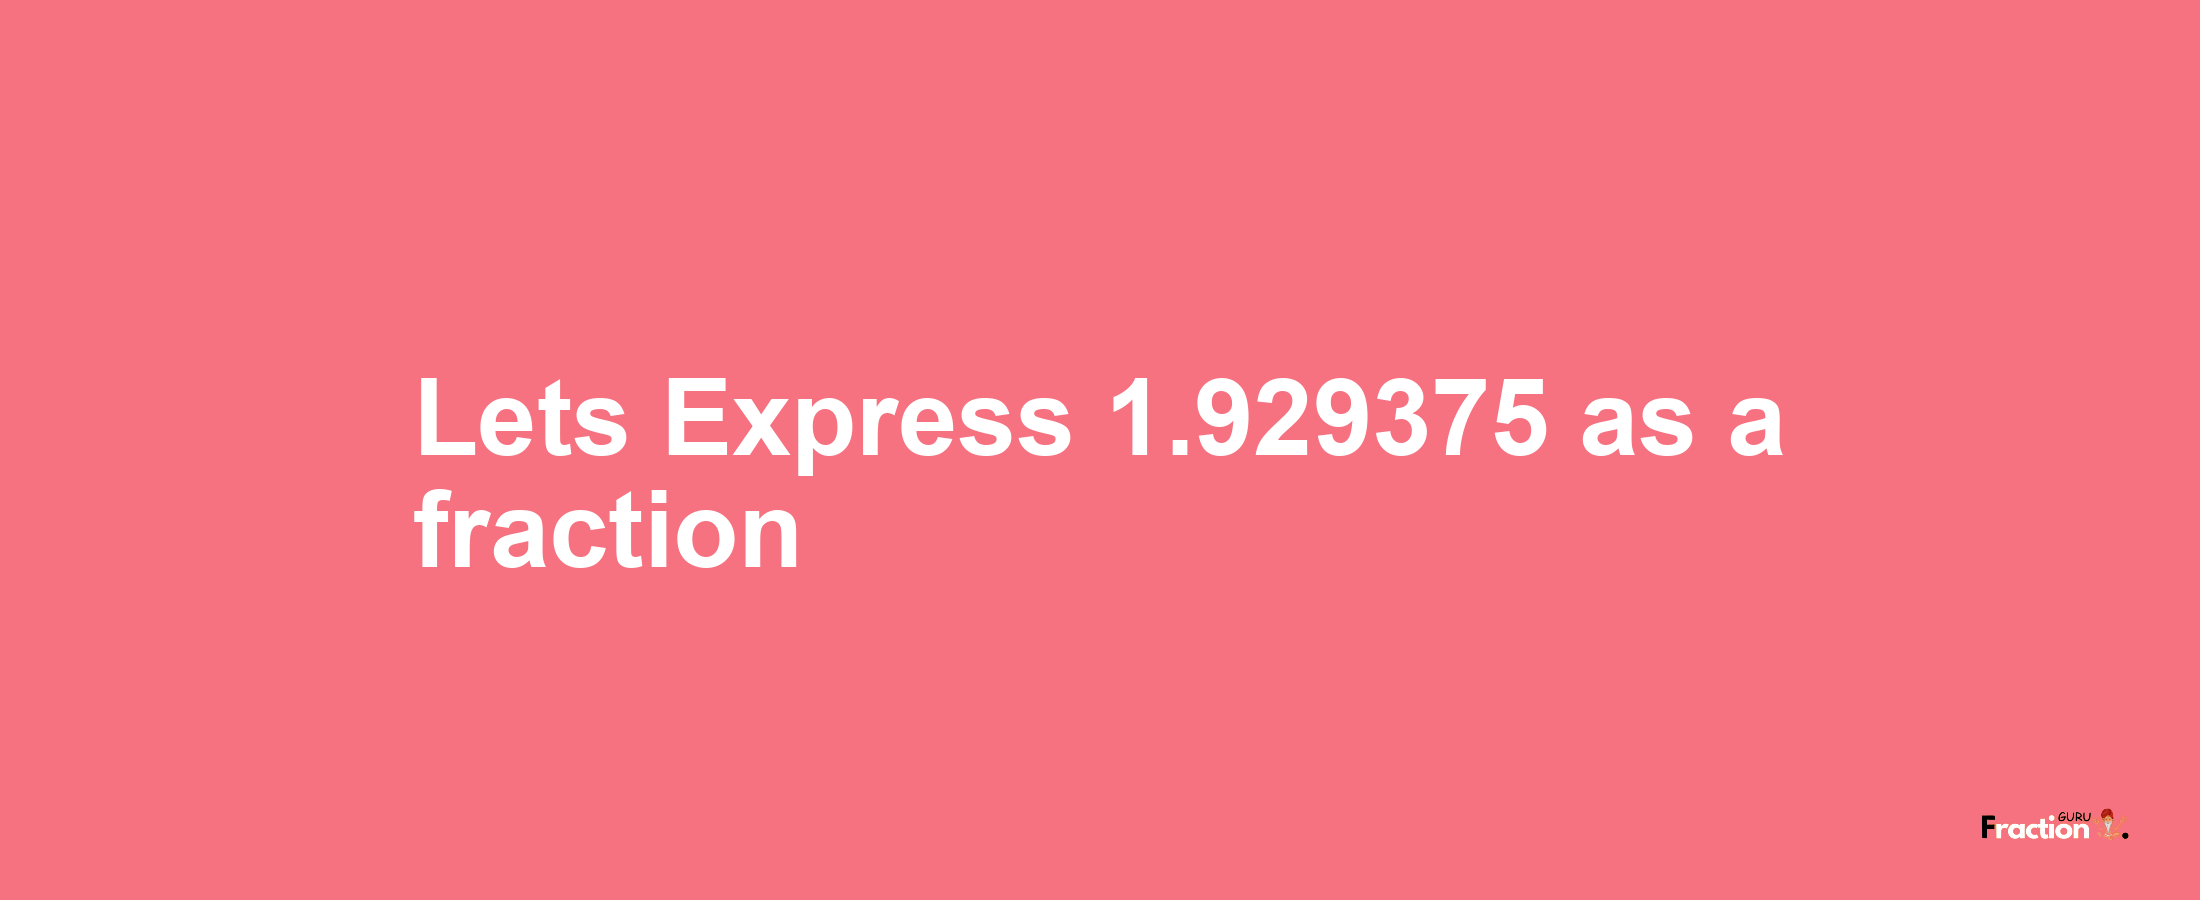 Lets Express 1.929375 as afraction